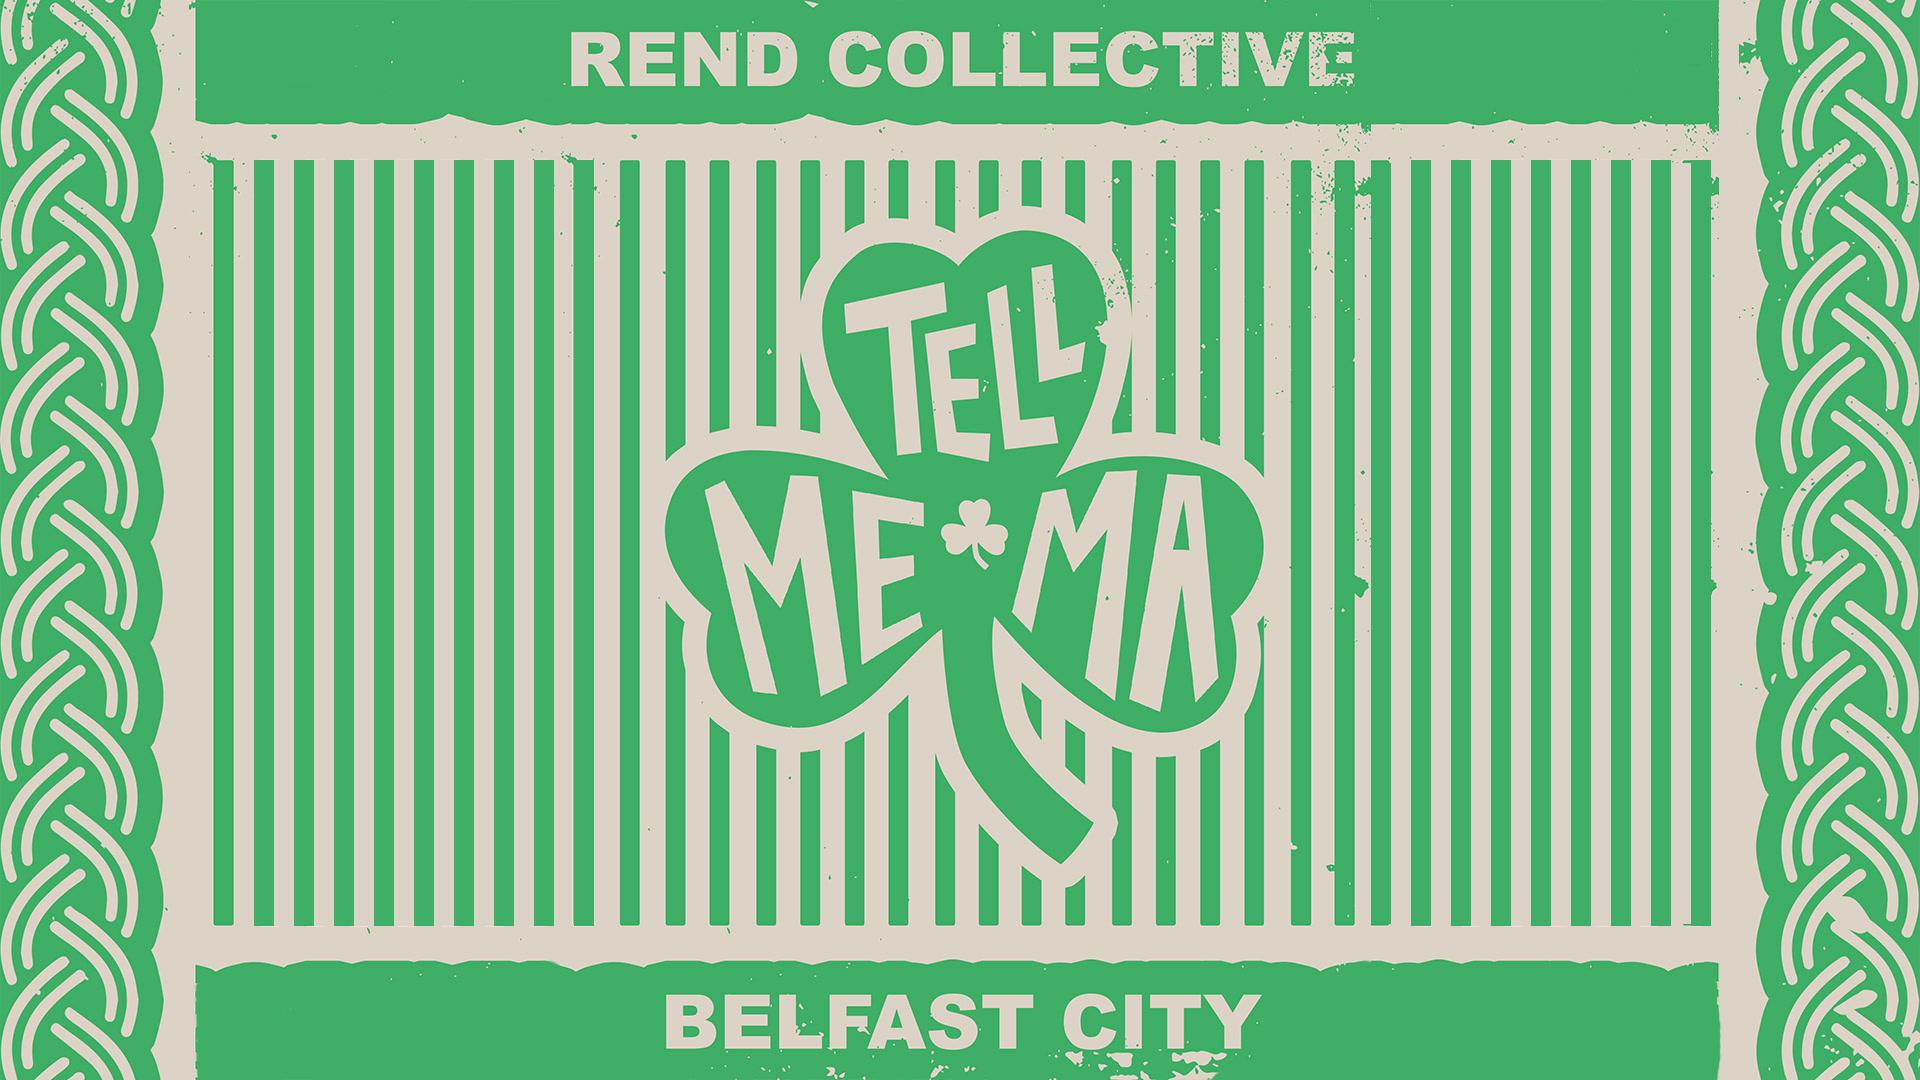 Rend Collective - Tell Me Ma (Belfast City) (Audio)